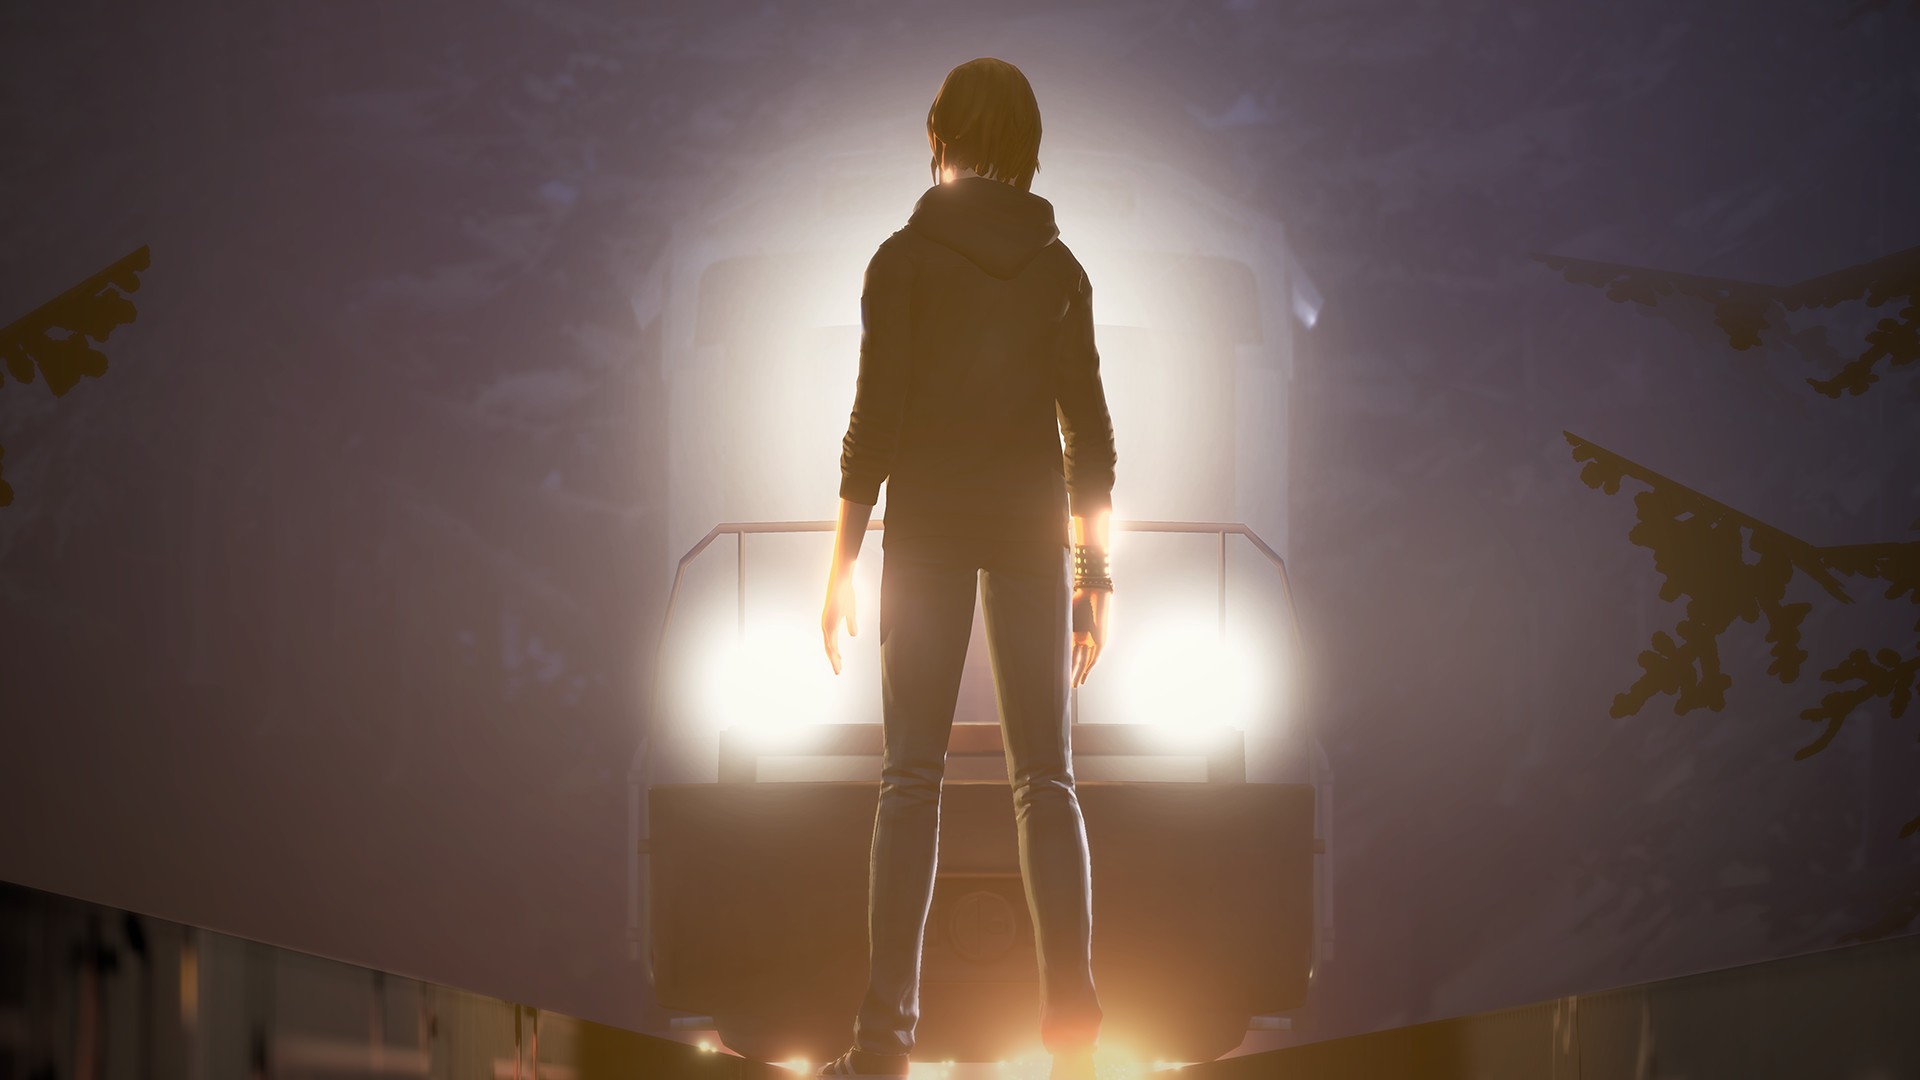 Life is Strange: Before the Storm para PS4 - Square Enix - Jogos